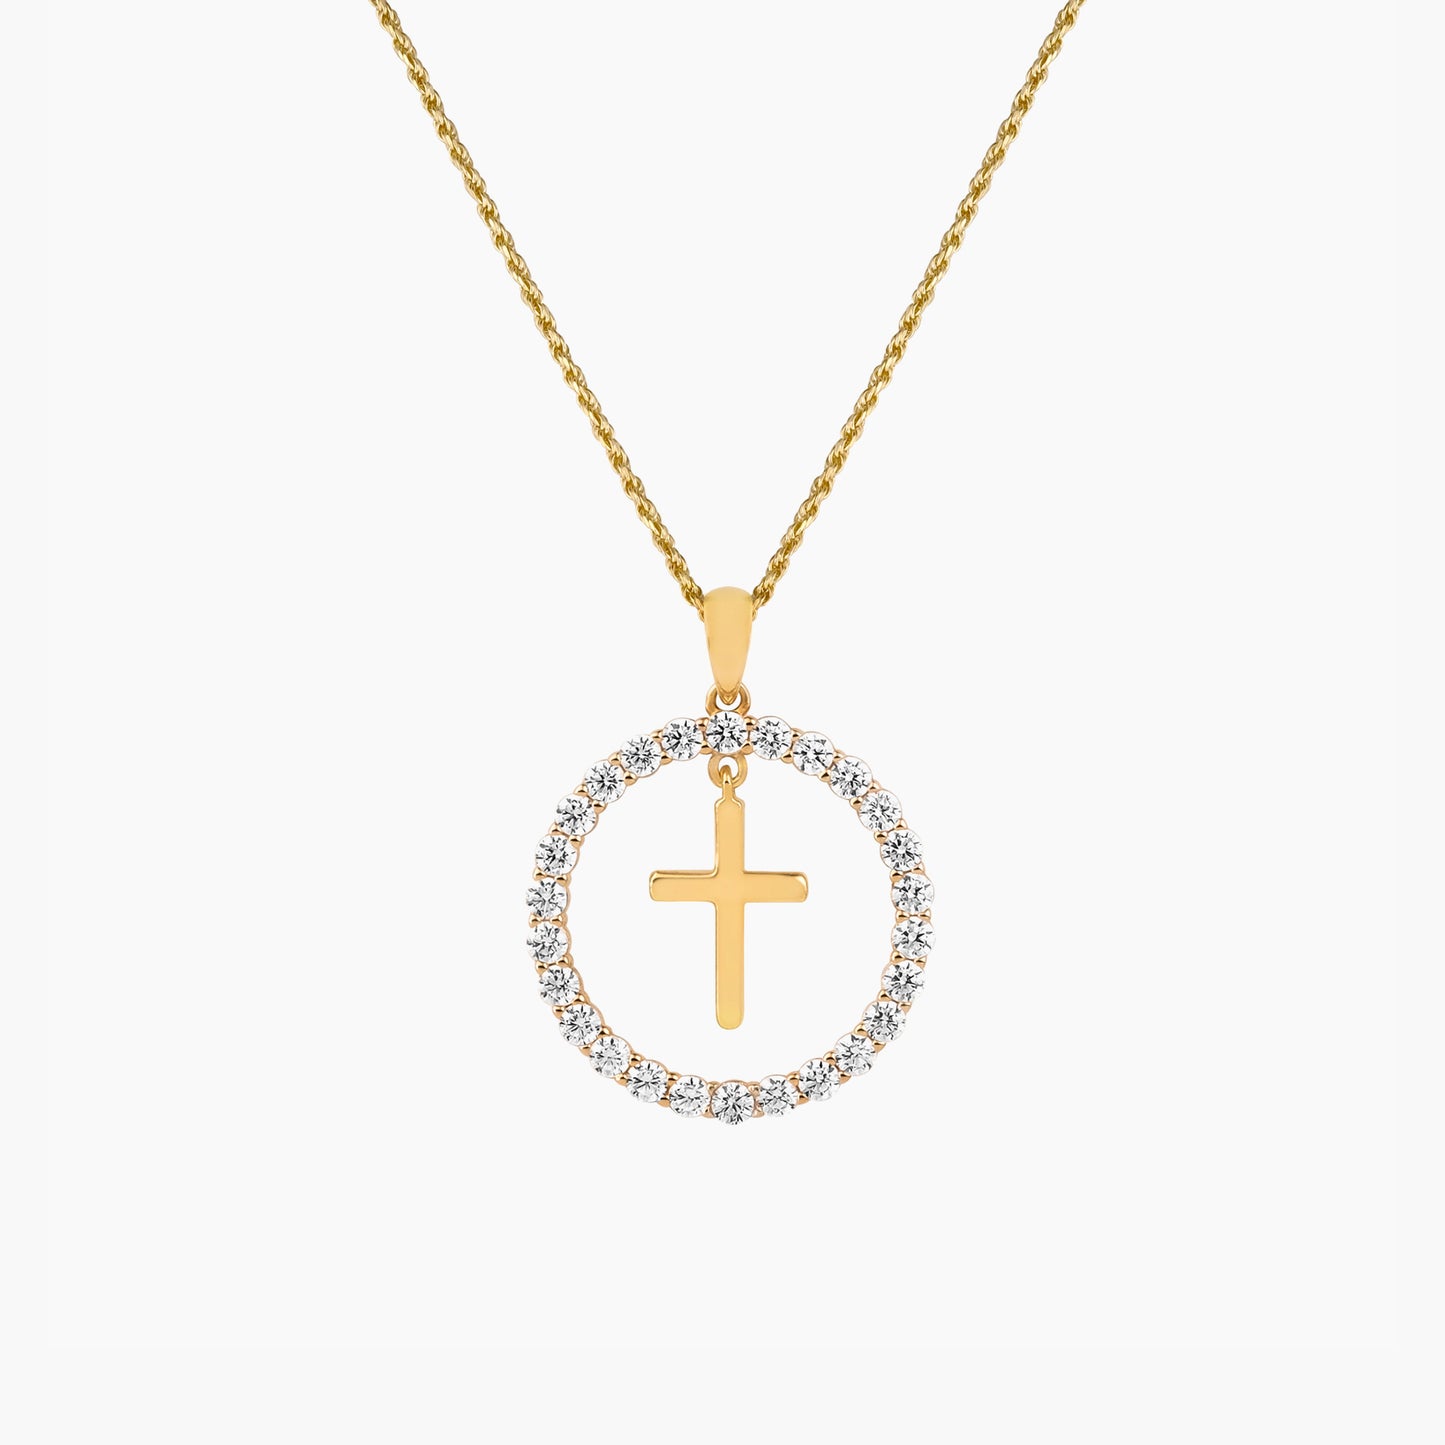 The Iced Coin With Dangling Cross Pendant